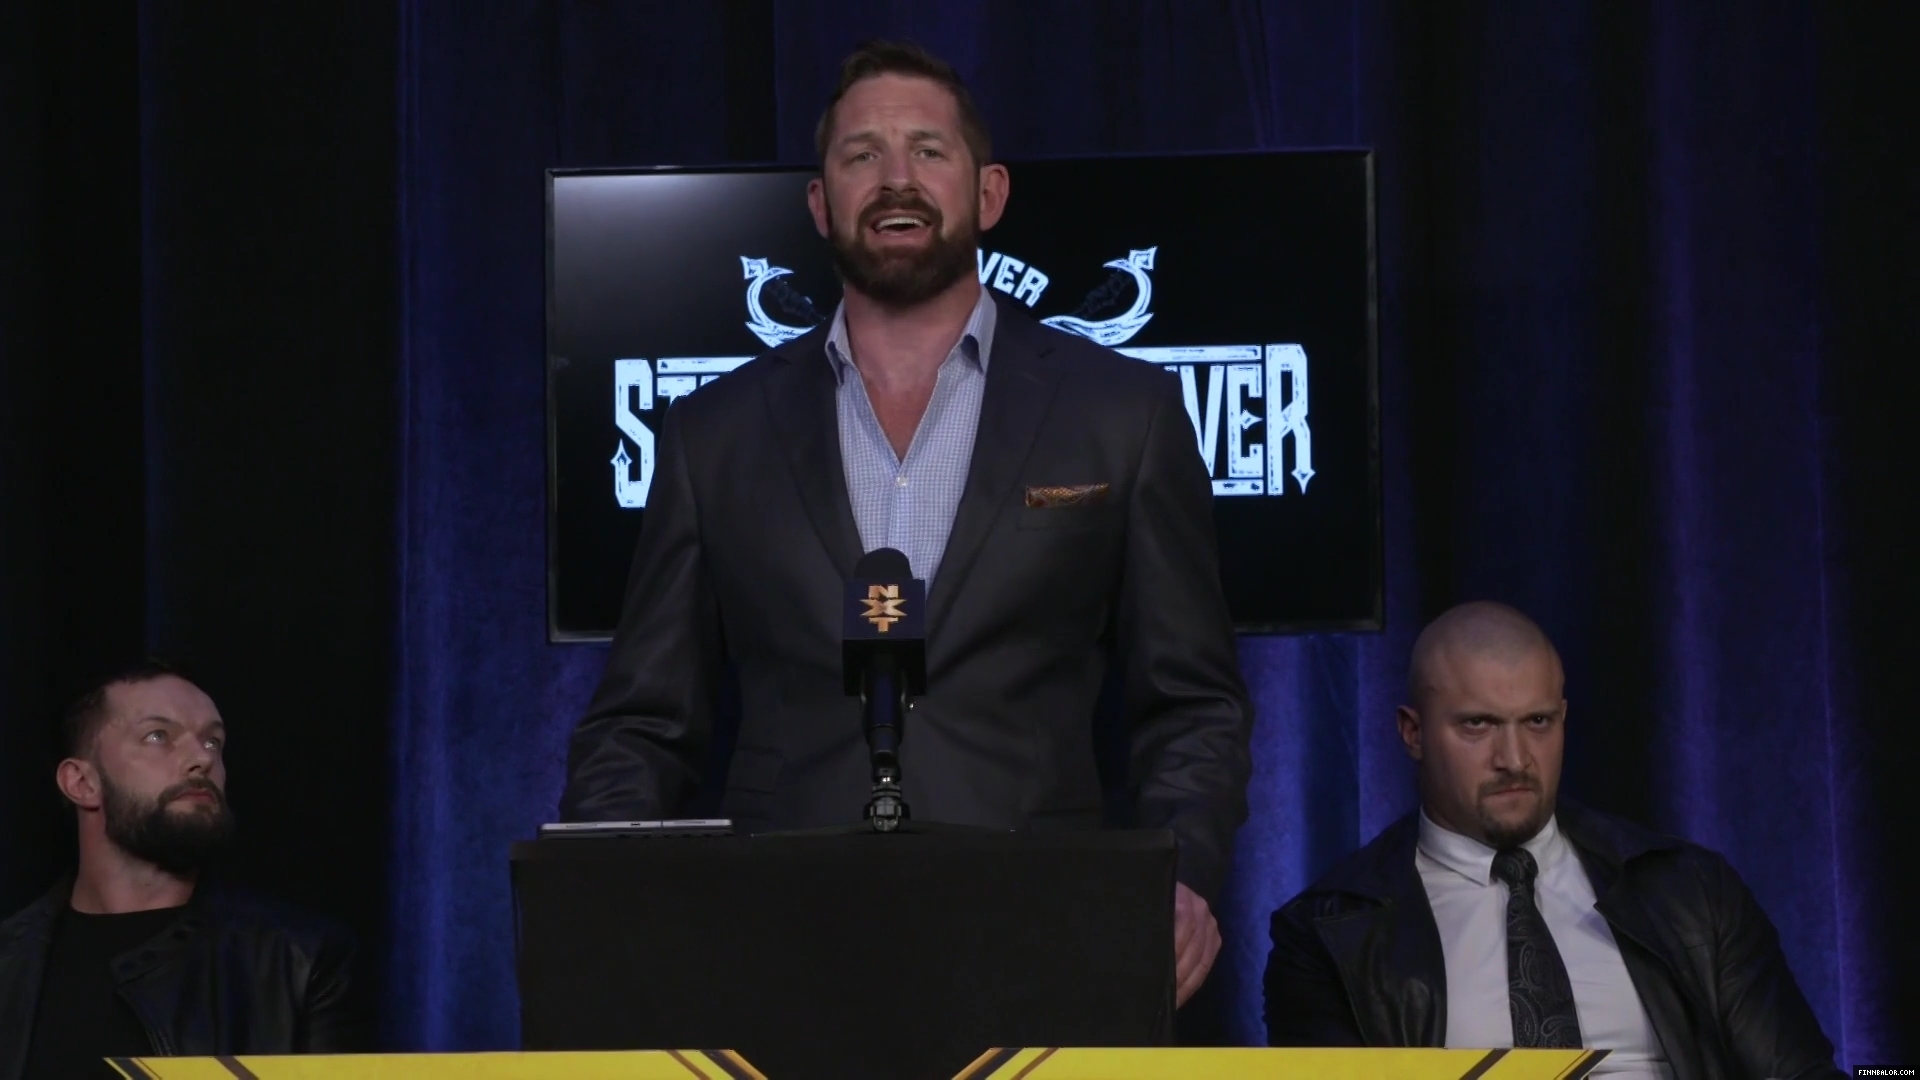 WWE_NXT_TakeOver_Stand_and_Deliver_2021_Global_Press_Conference_1080p_WEB_h264-HEEL_mp42123.jpg